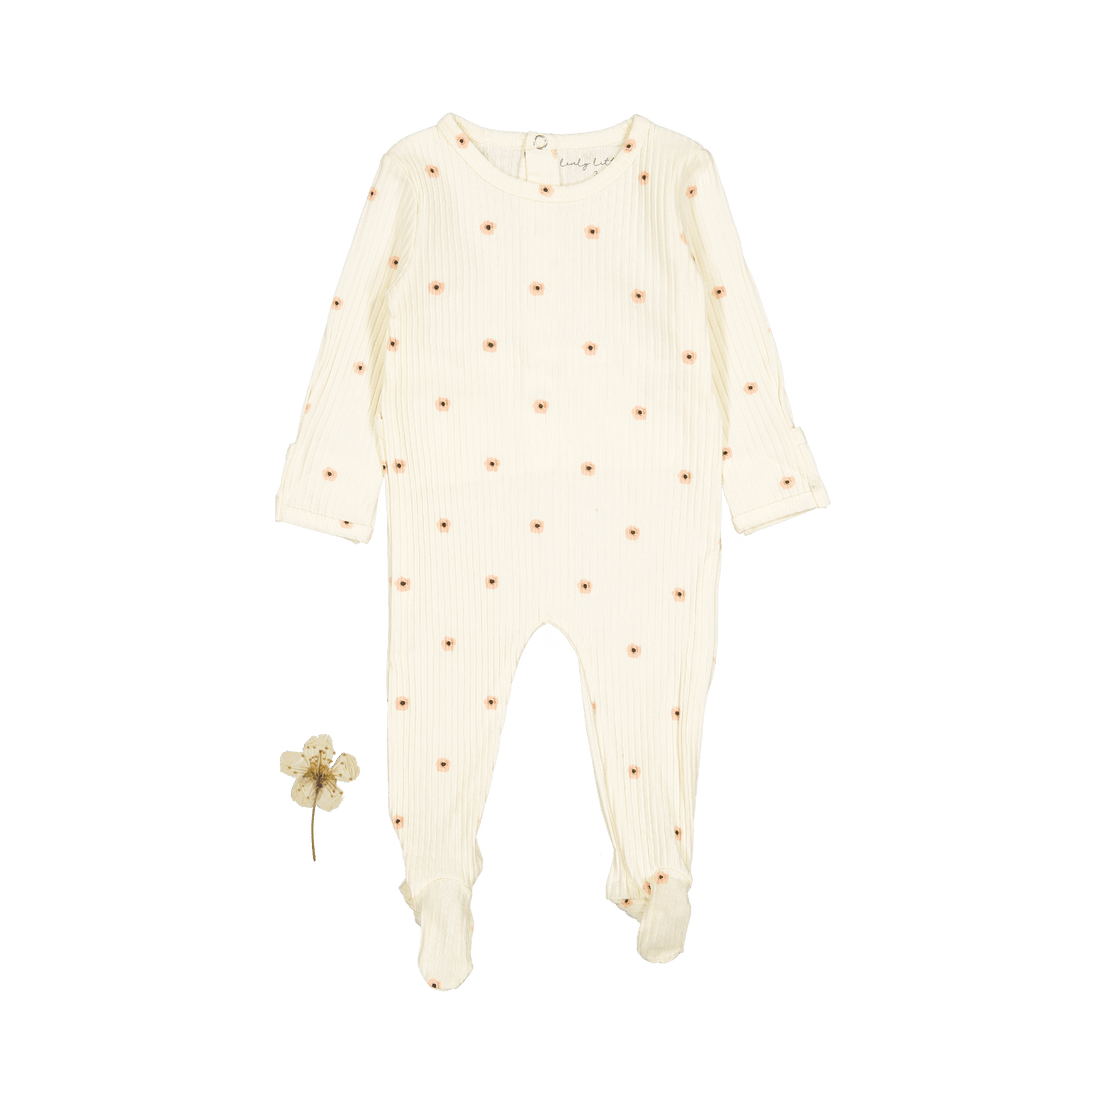 The Printed Romper - Butter Flower